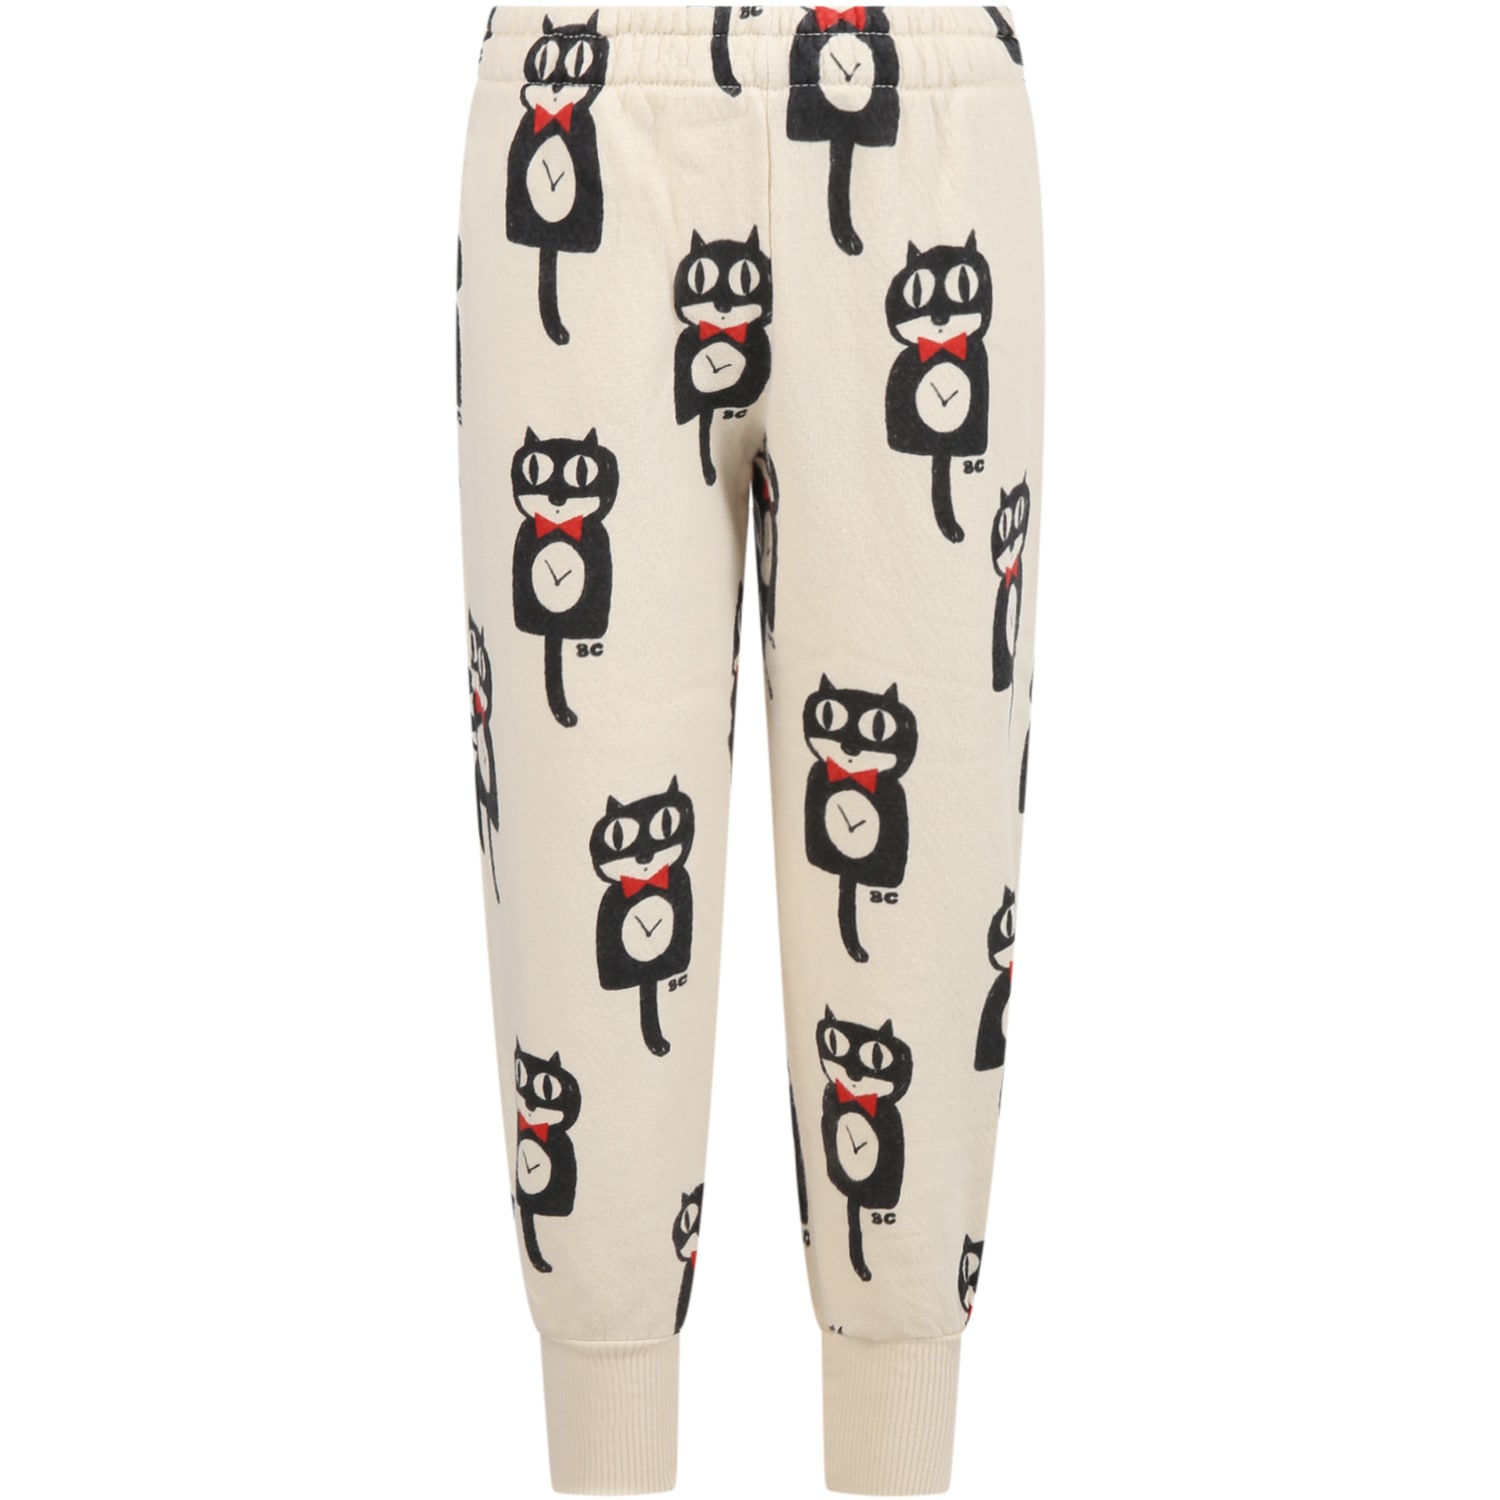 Bobo Choses Ivory Sweatpants For Boy With Black Cat